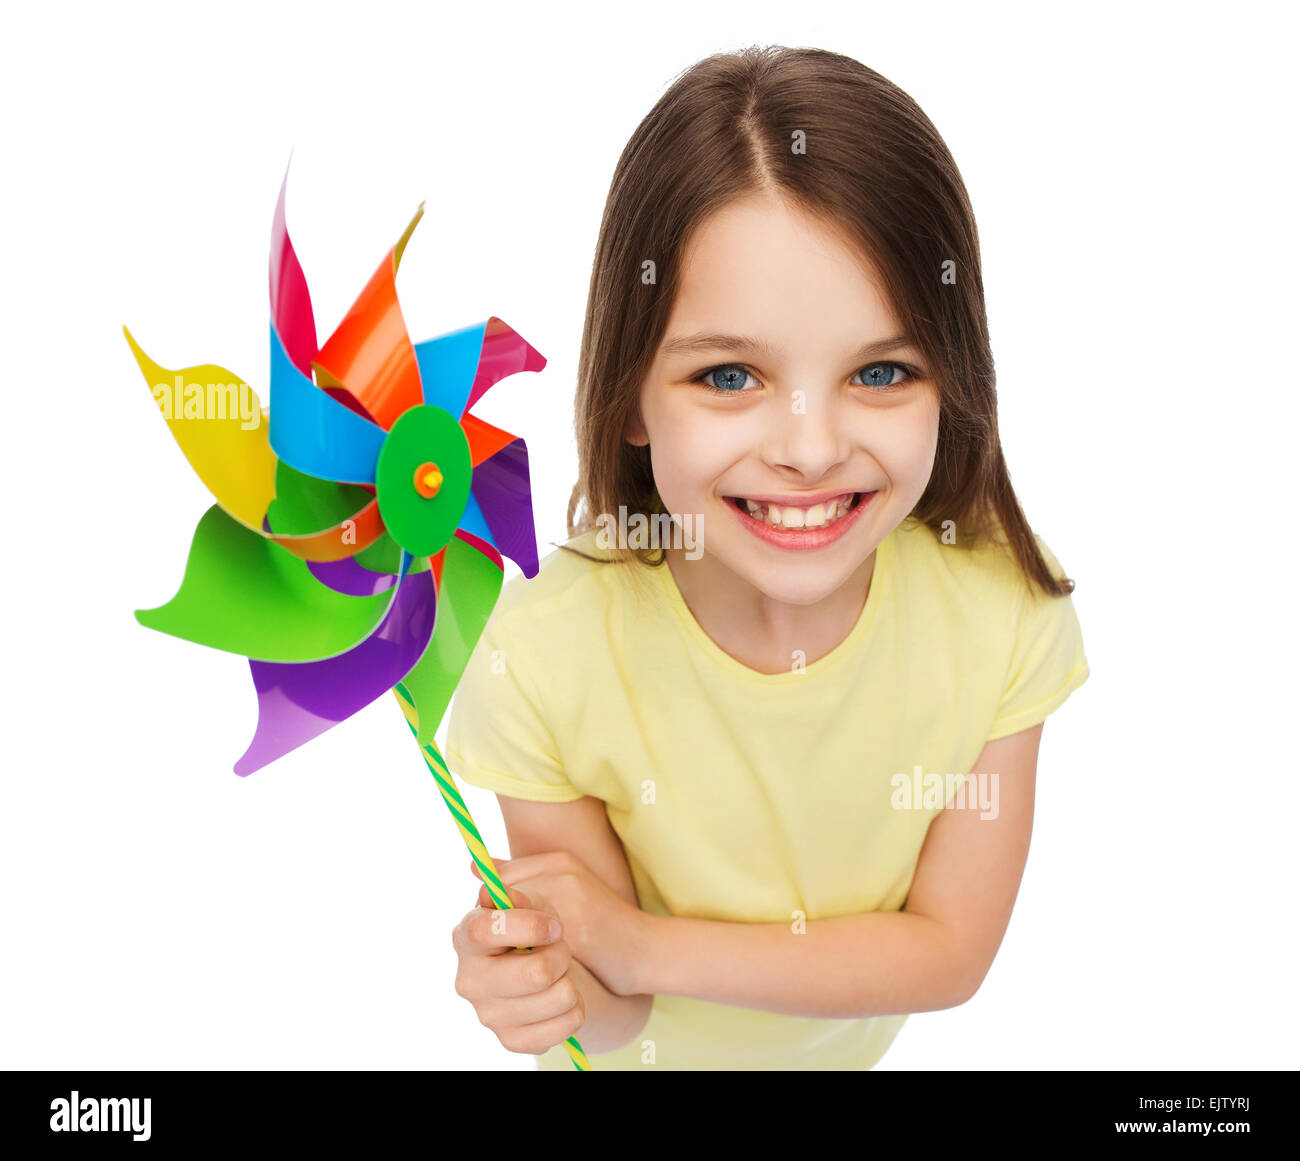 smiling child with colorful windmill toy Stock Photo